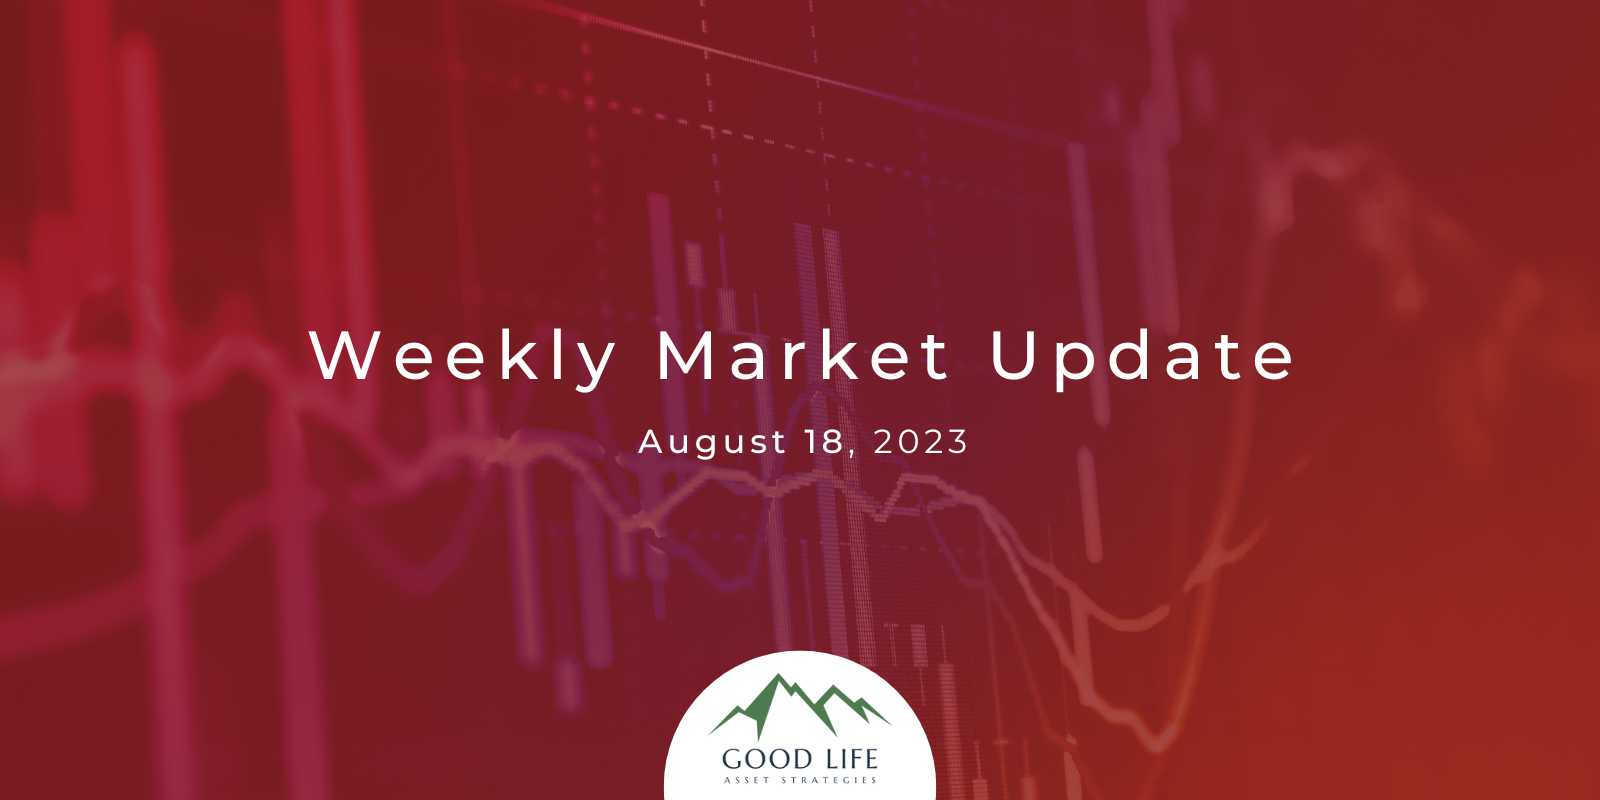 Stock Market Volatility is on the Rise in Response to Pullback: Weekly Market Update for August 18, 2023, from DeWayne Hall